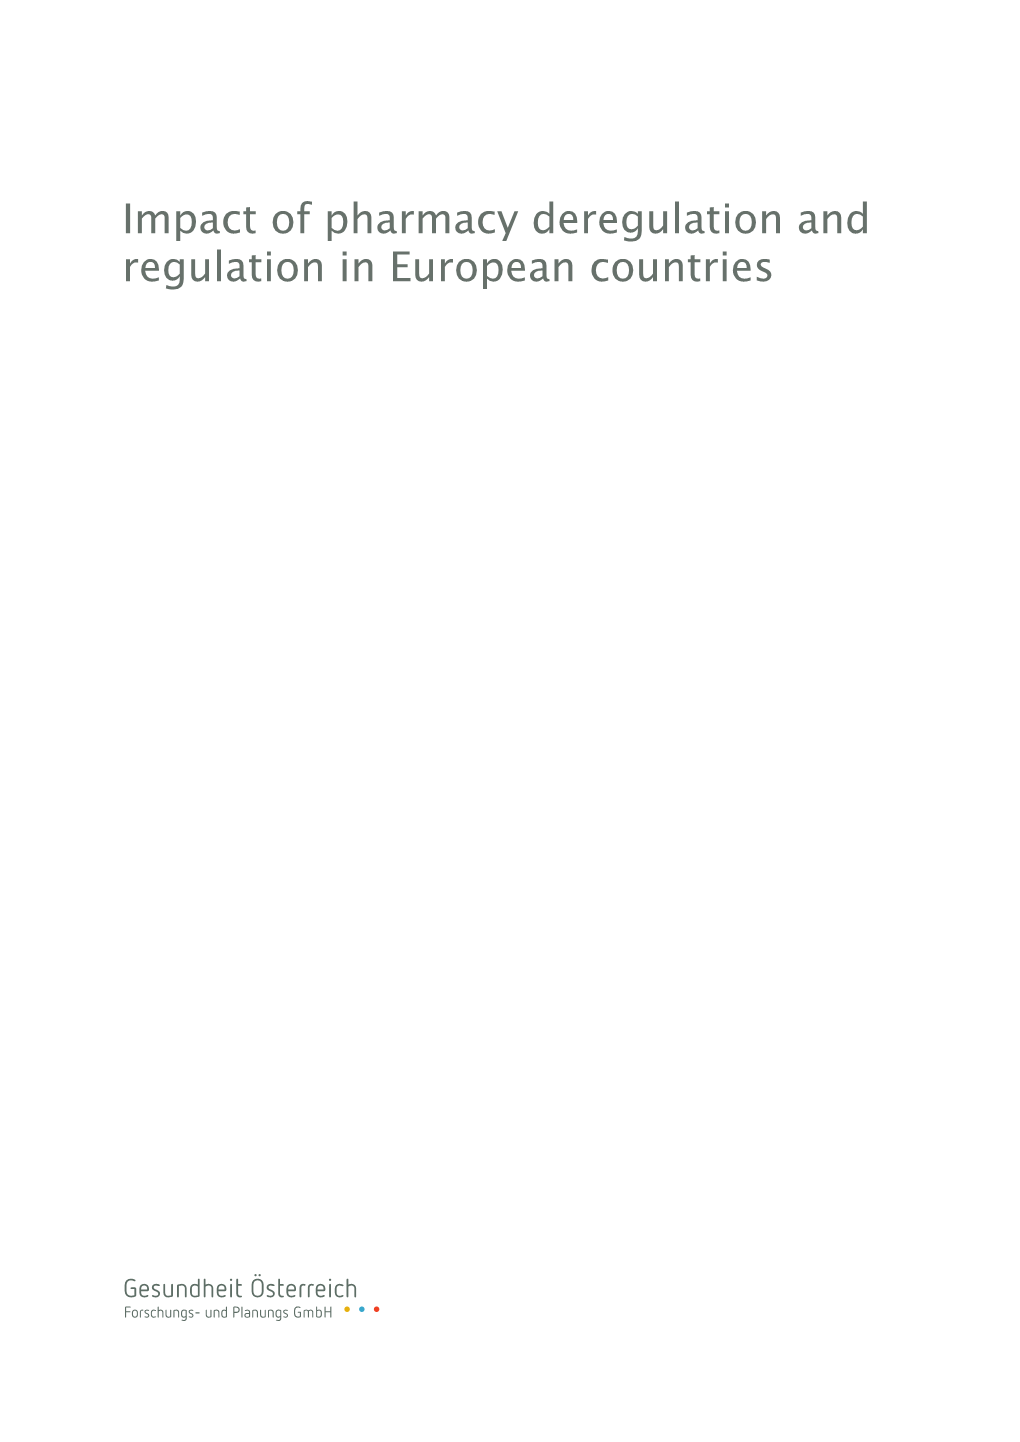 Impact of Pharmacy Deregulation and Regulation in European Countries